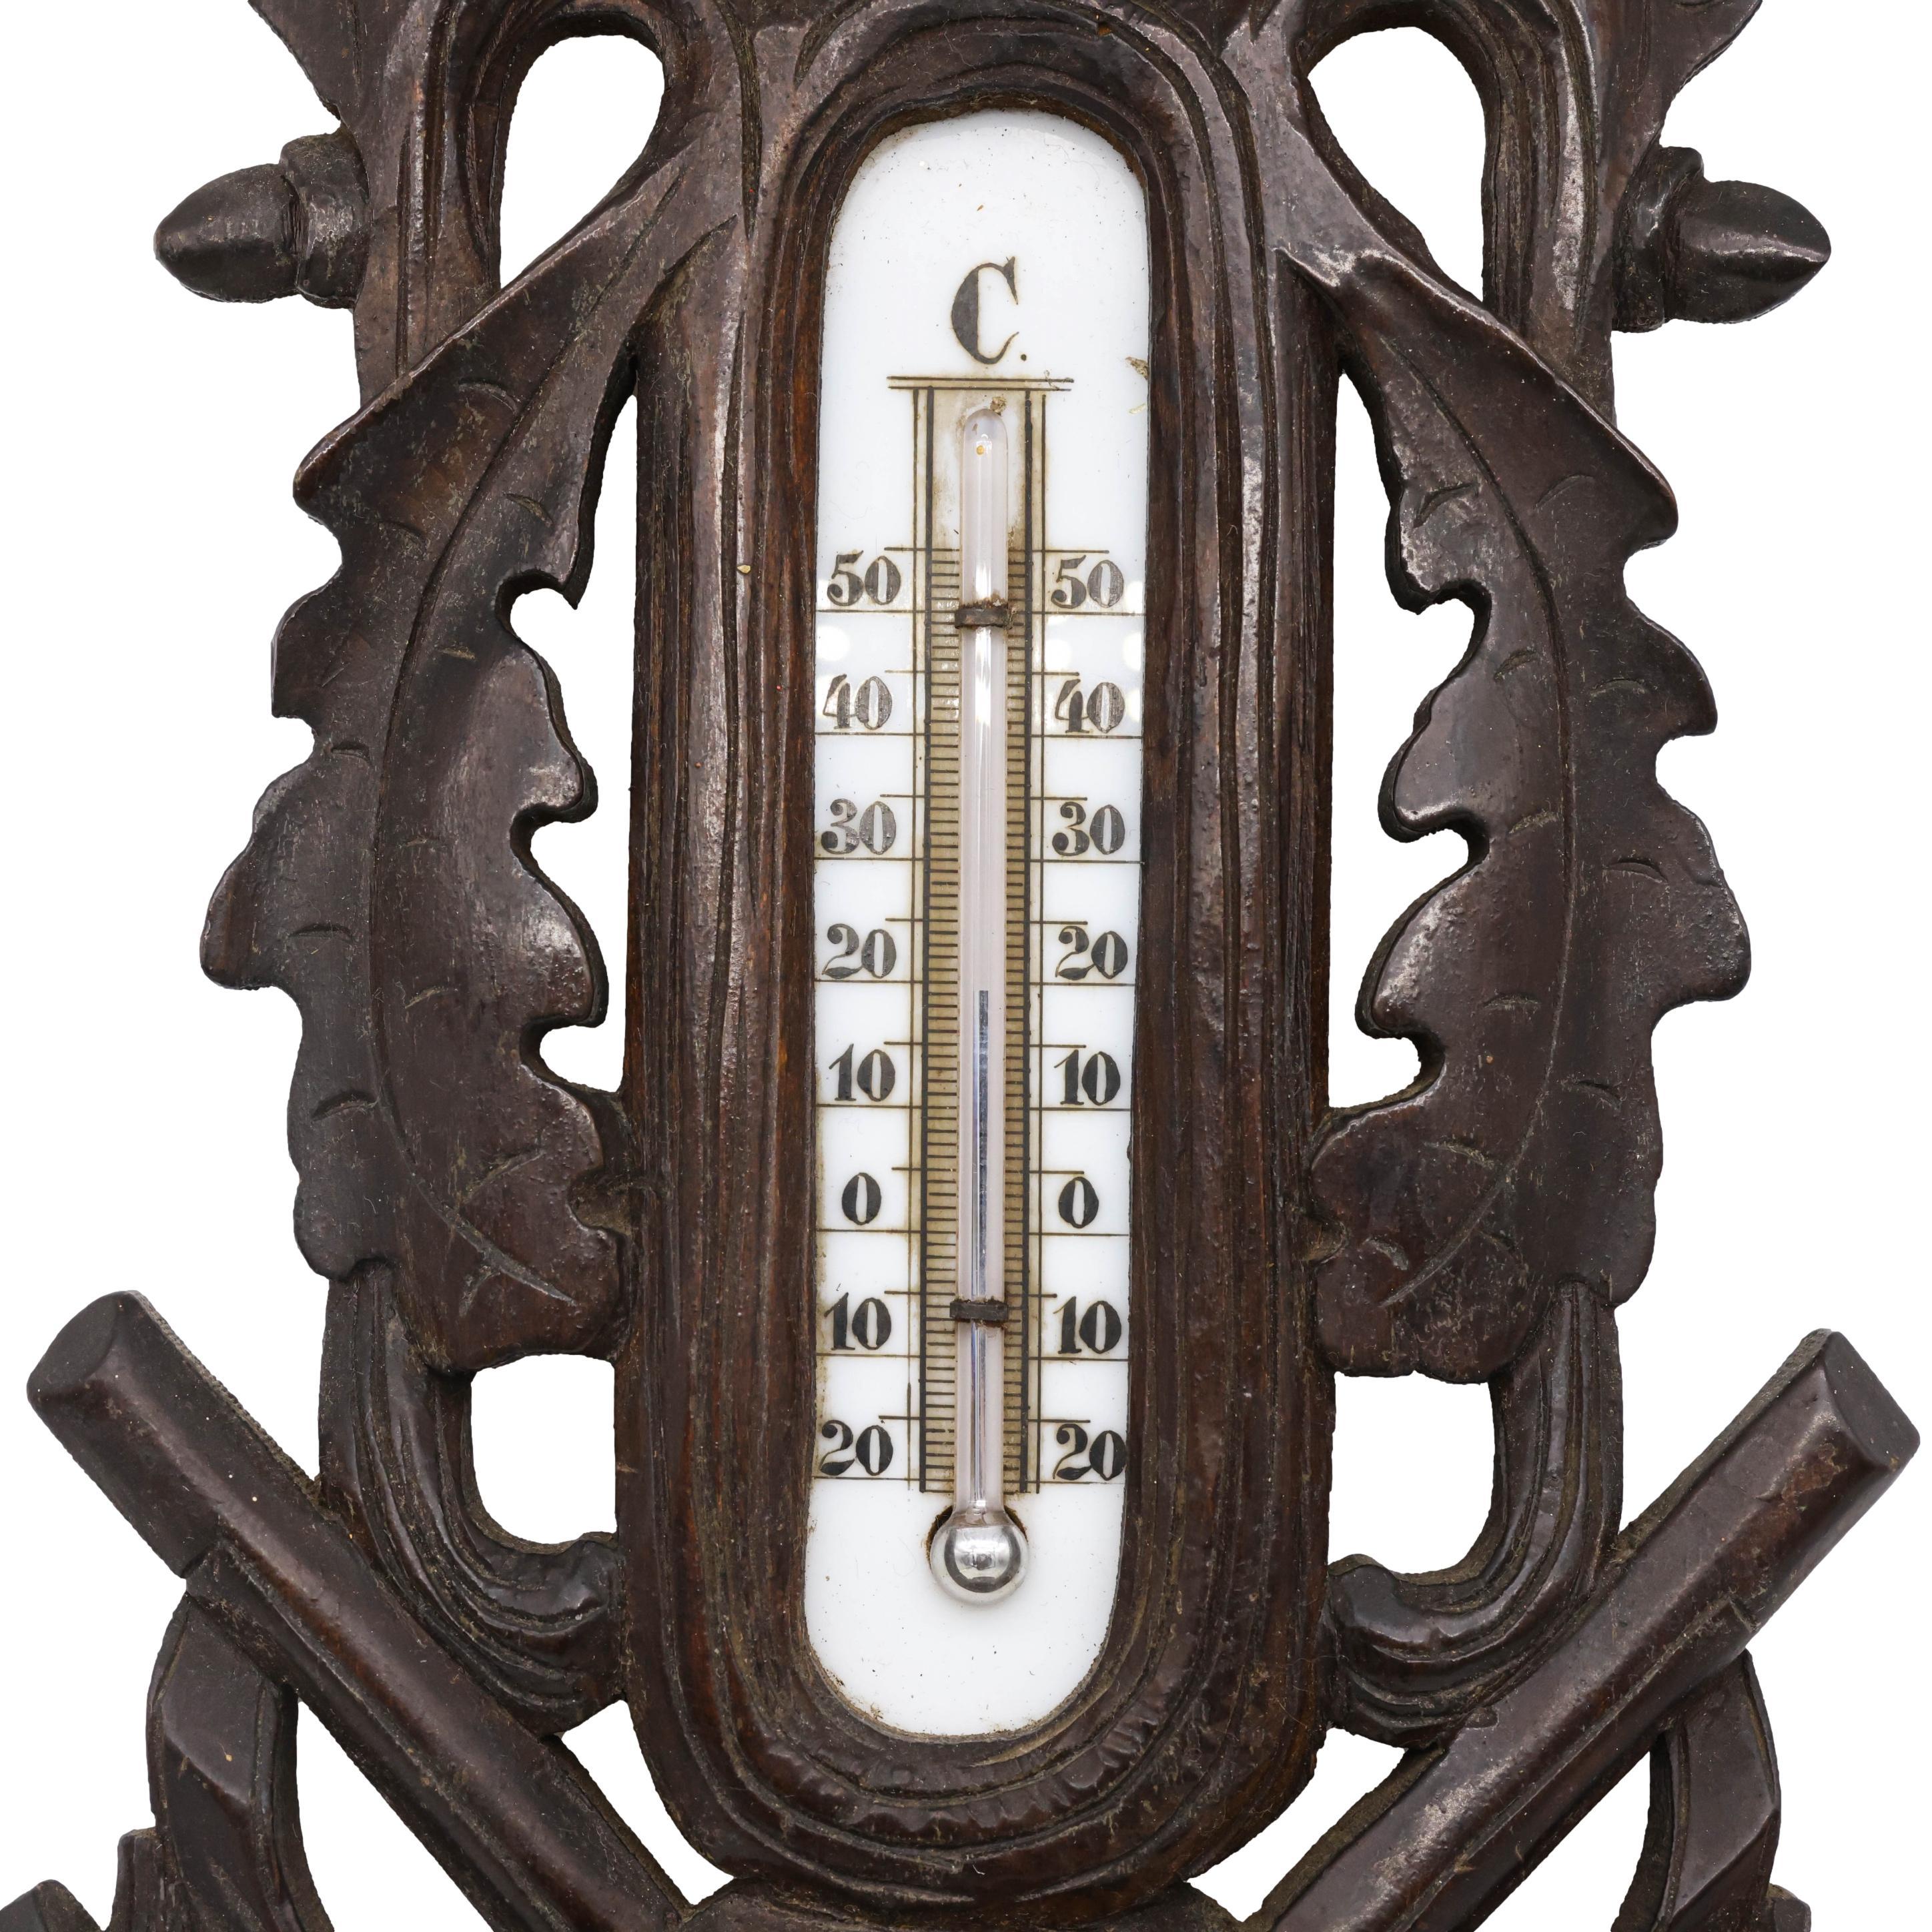 Black Forest Hand-Carved Barometer and Thermometer, the case with crossed shotguns and a hunting game bag, with carved oak leaves, surmounted by a stag's head; the barometer by G. Keller, Paris, with 1.63-in silvered and die-struck dial annotated in